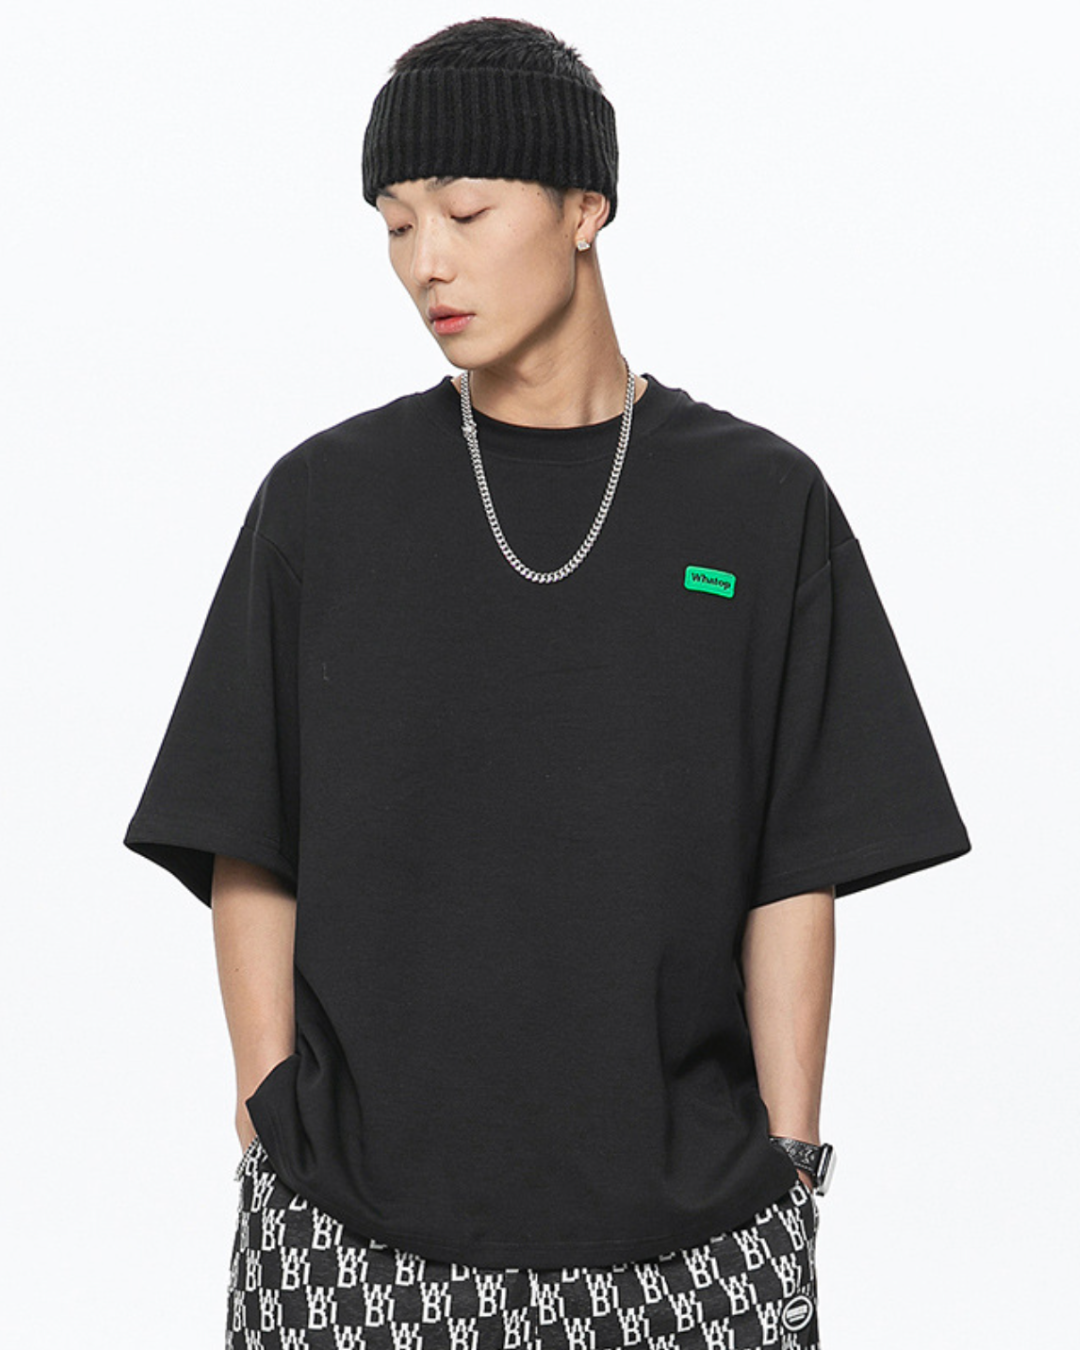 Whatop Oversized Tee in Black